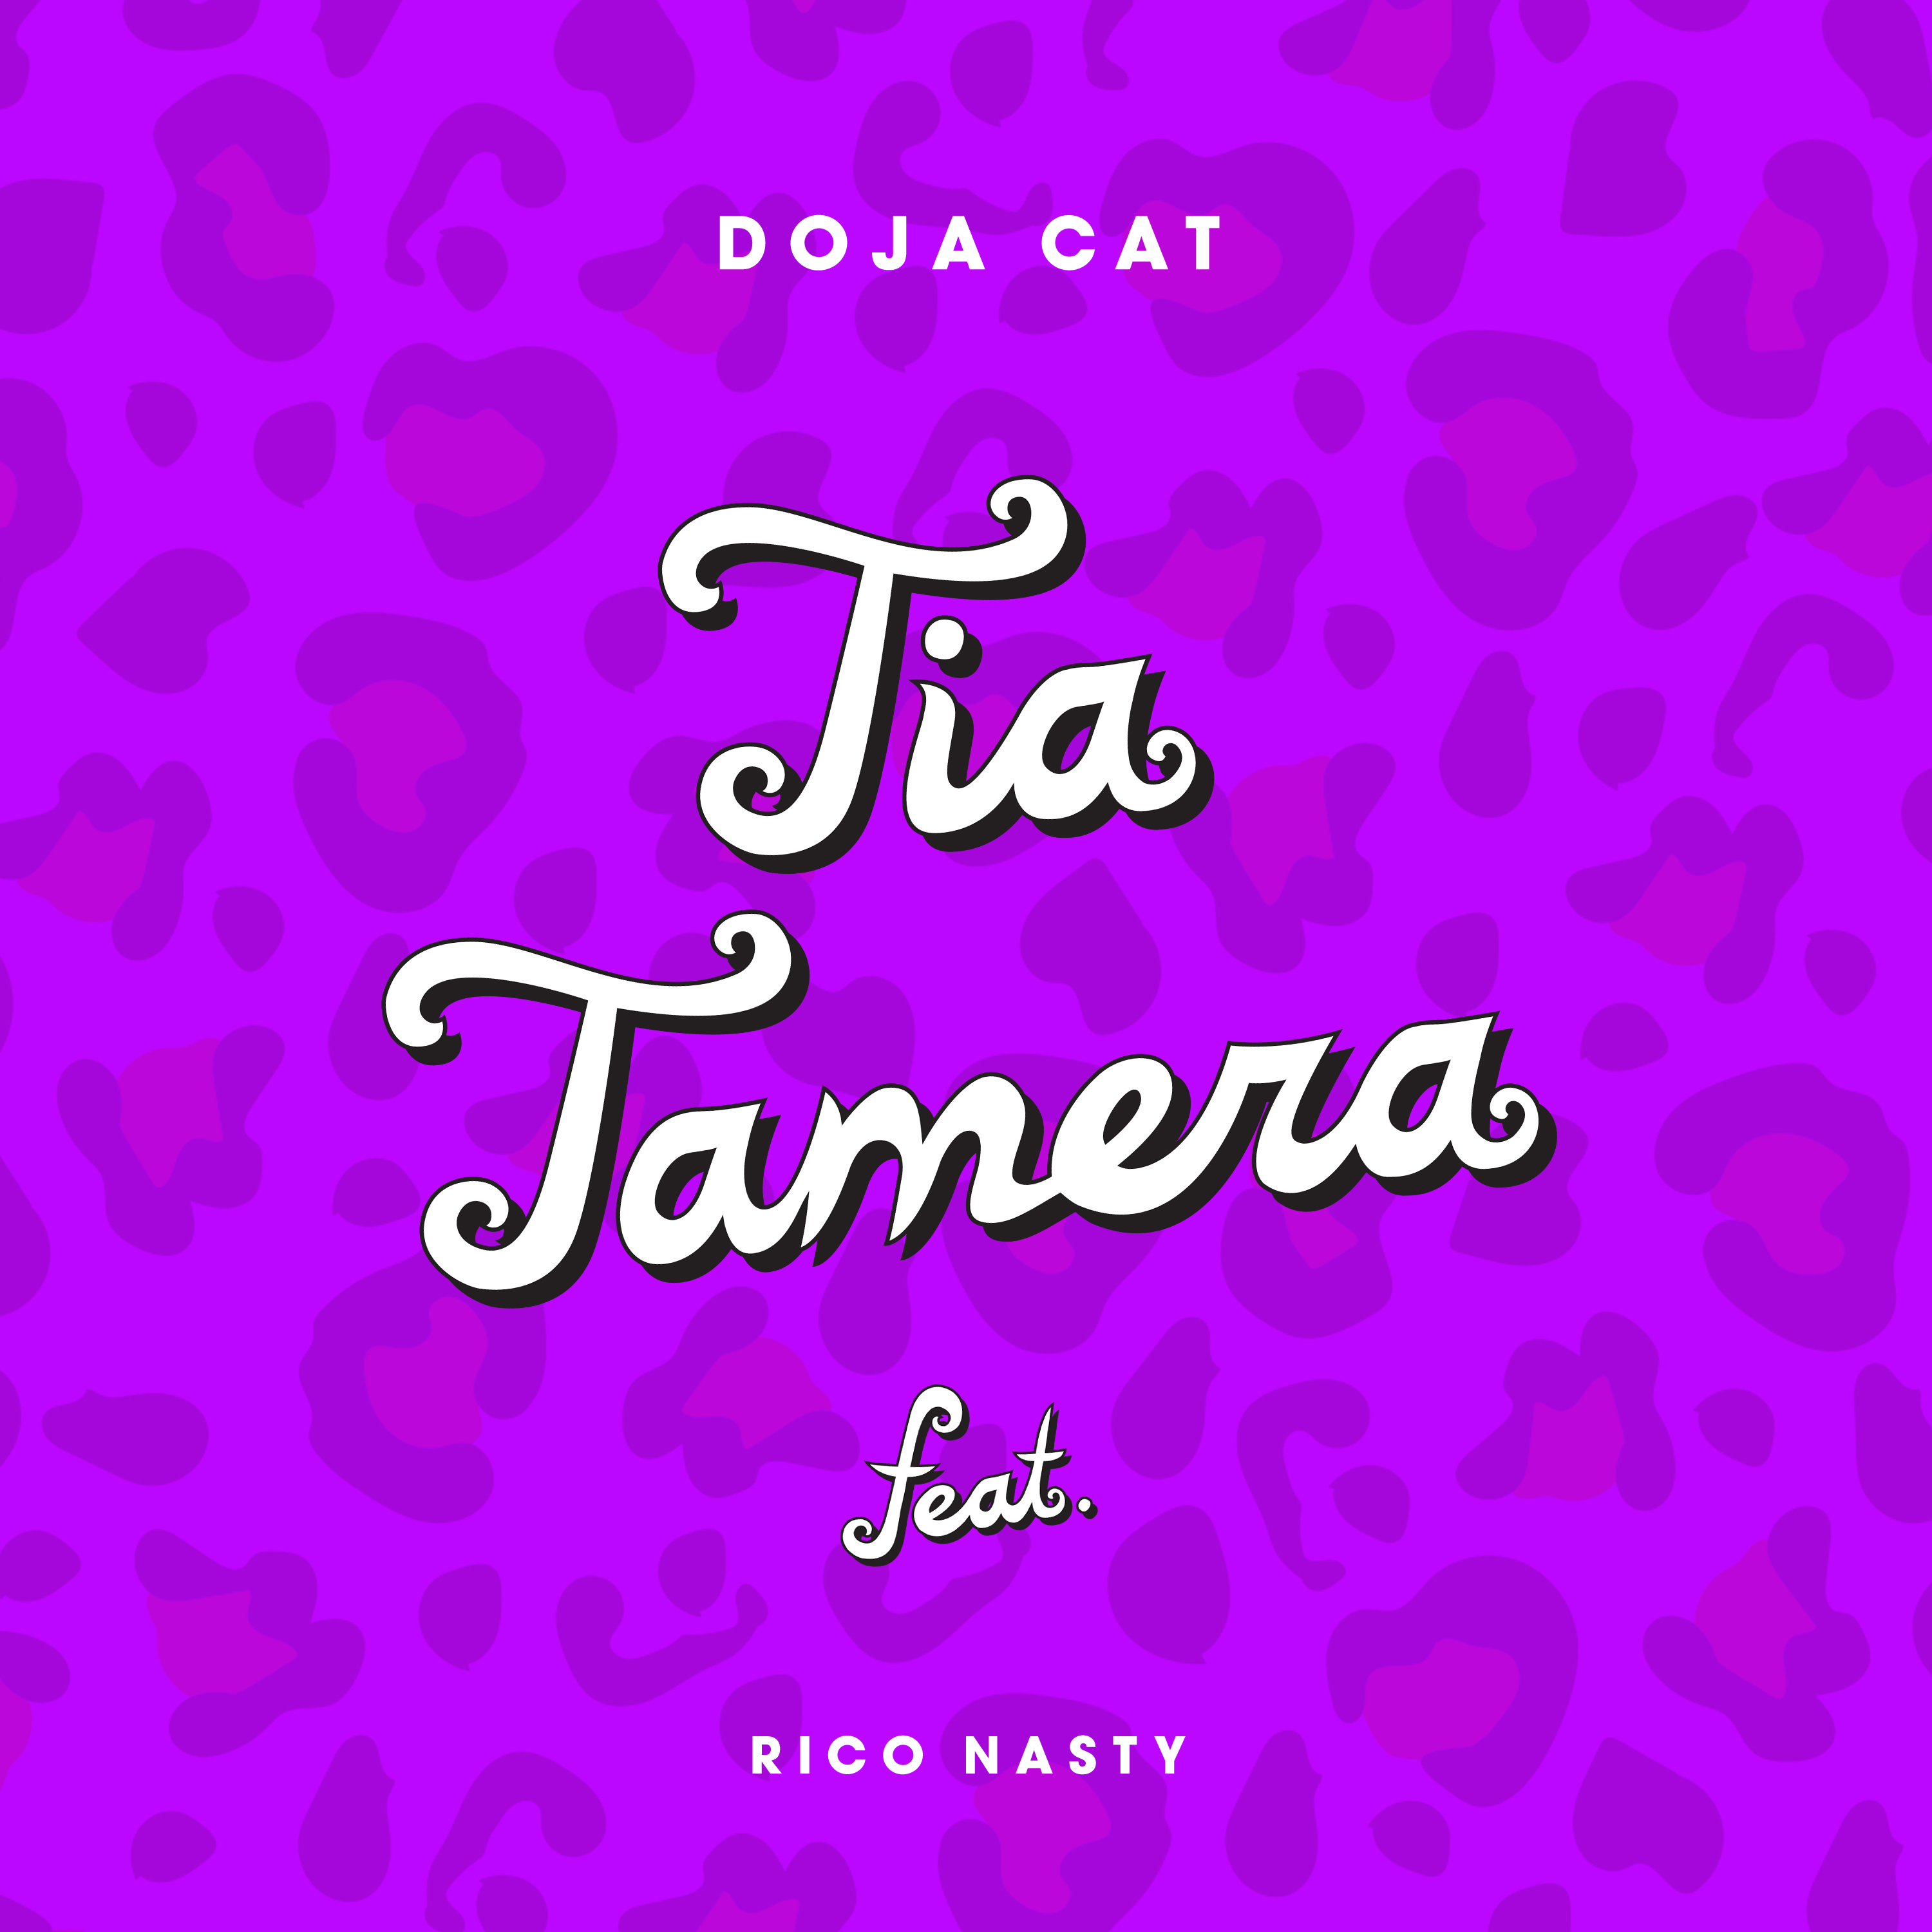 Doja Cat Shares New Single And Video For Tia Tamera Ft Rico Nasty Amala Deluxe Album Due Out March 1st Via Rca Records Rca Records